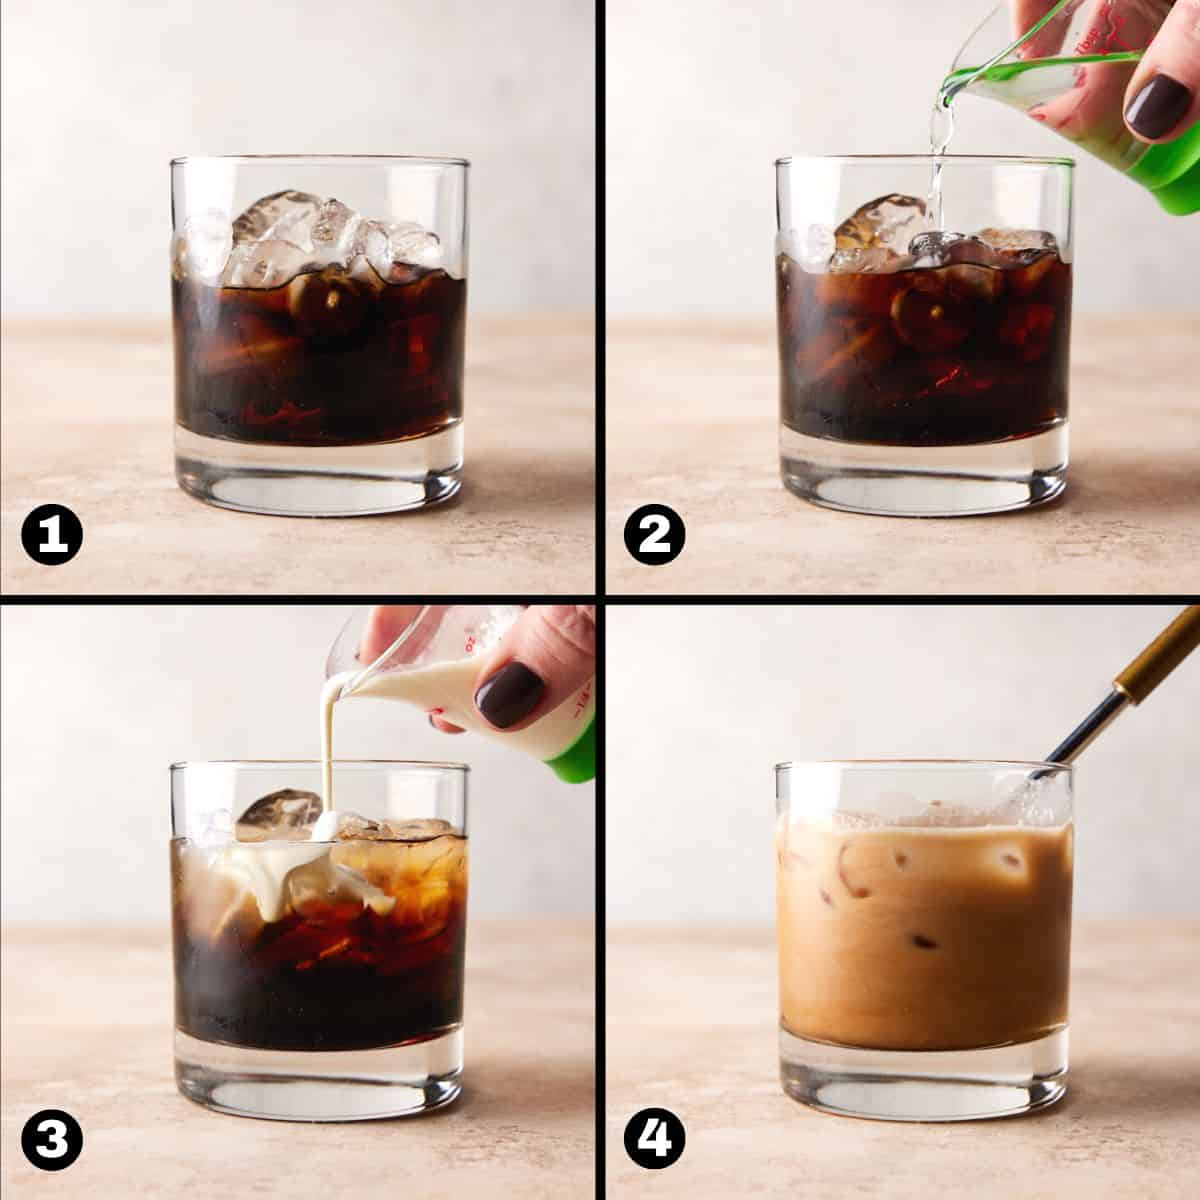 Steps 1-4 of making a Kahlua White Russian. Measuring liquids and stirring.